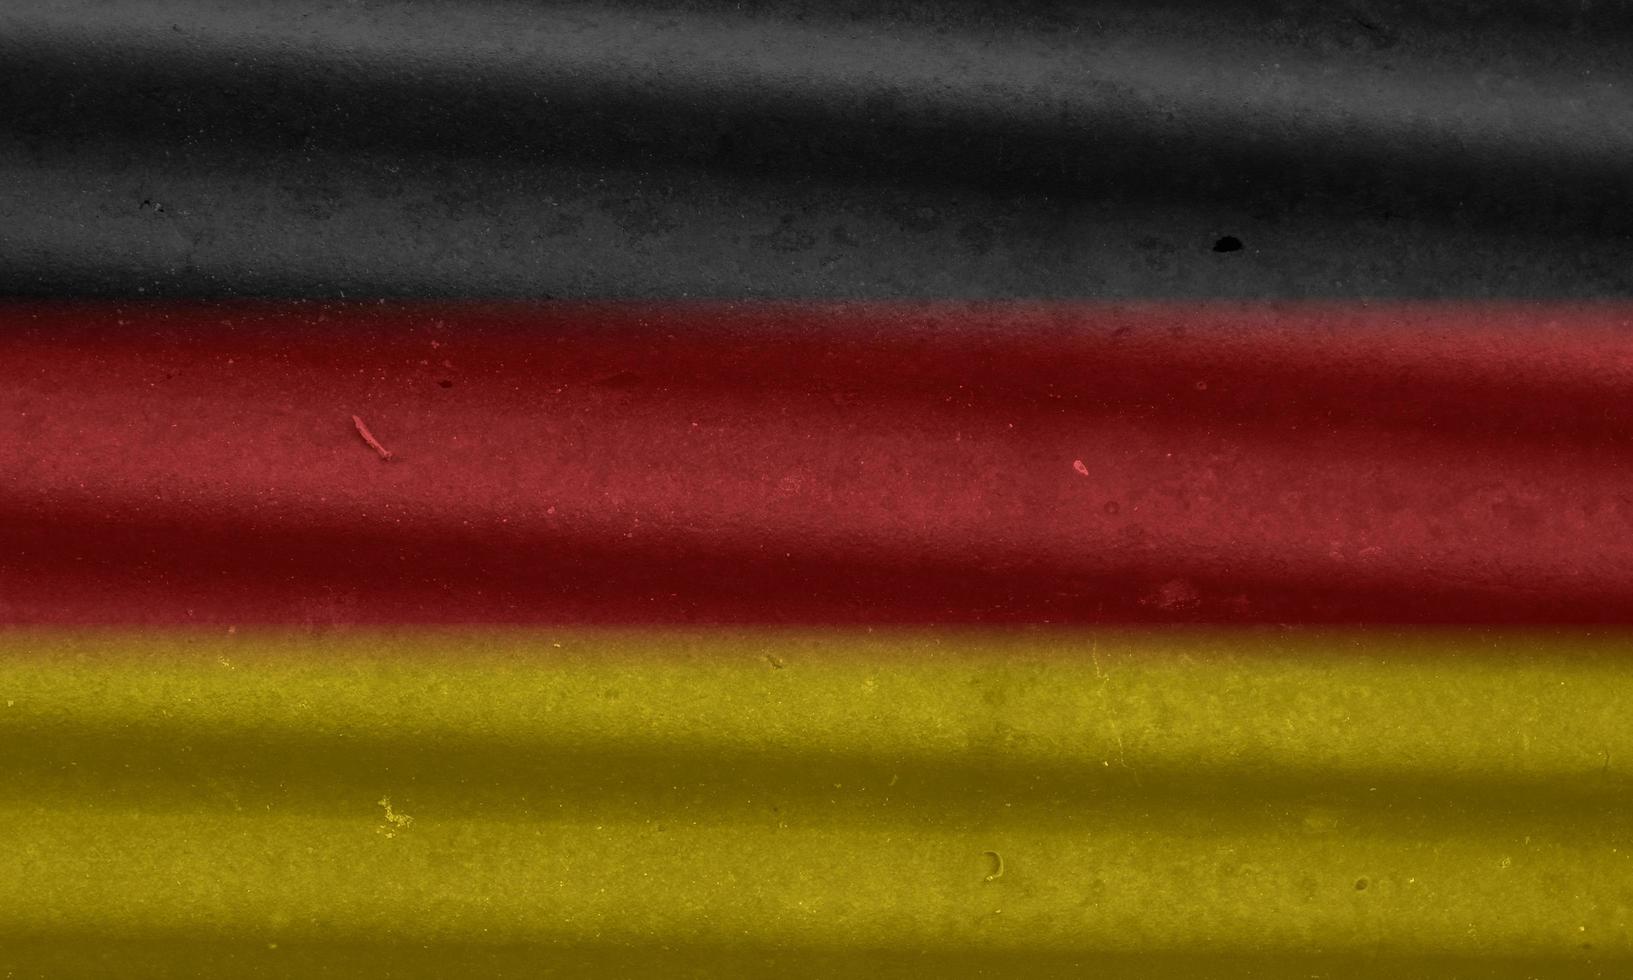 german flag texture as a background photo